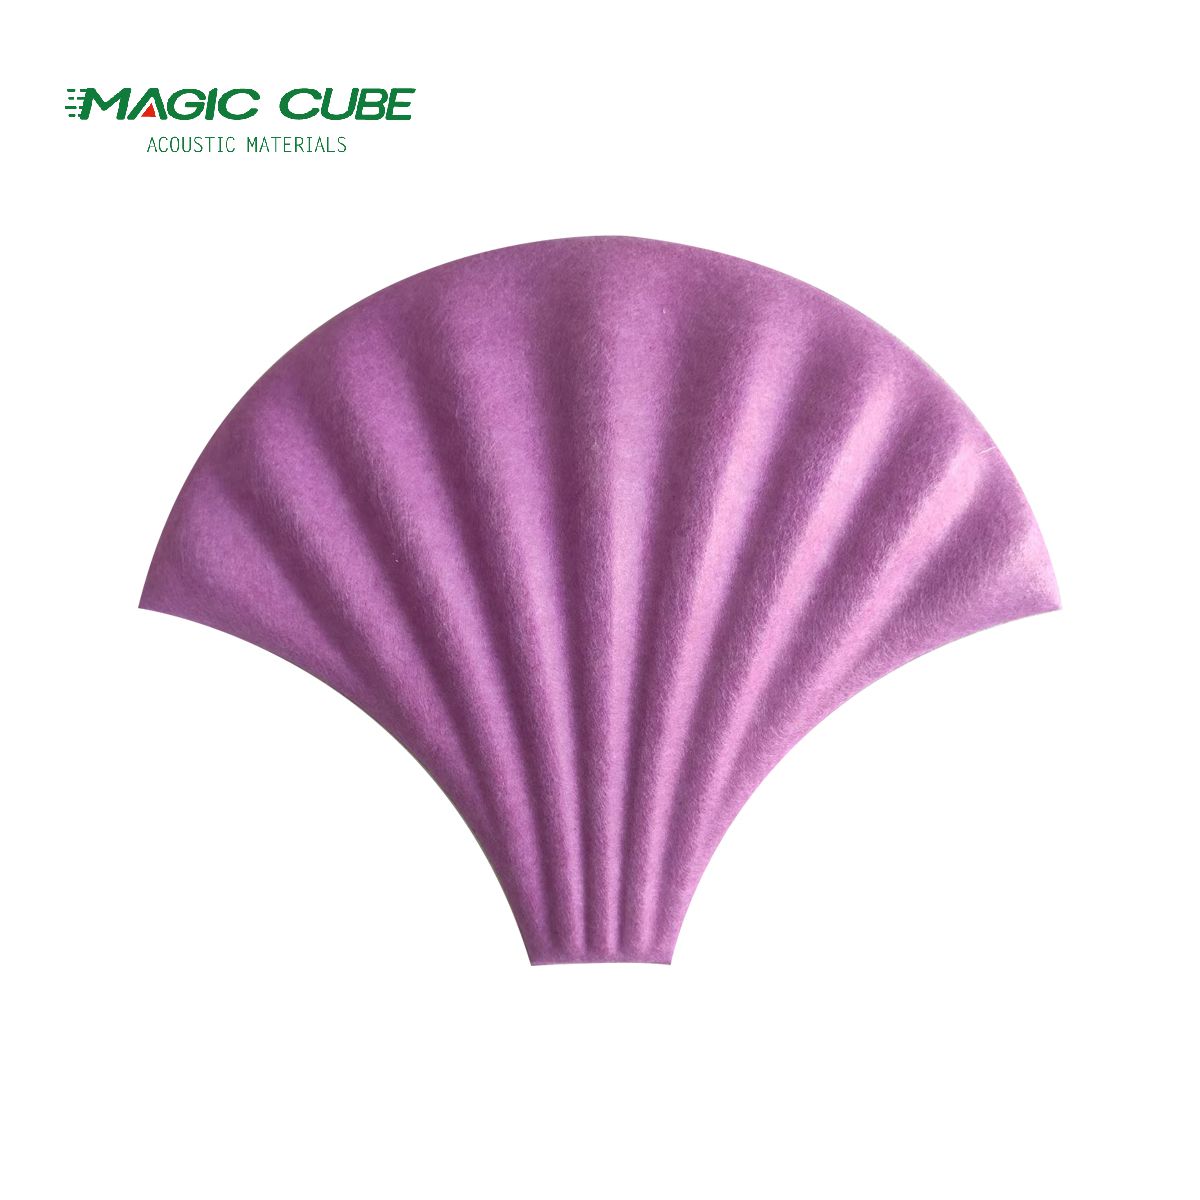 High Quality Shell-Shaped PET Acoustic Panel for the Wall Covering